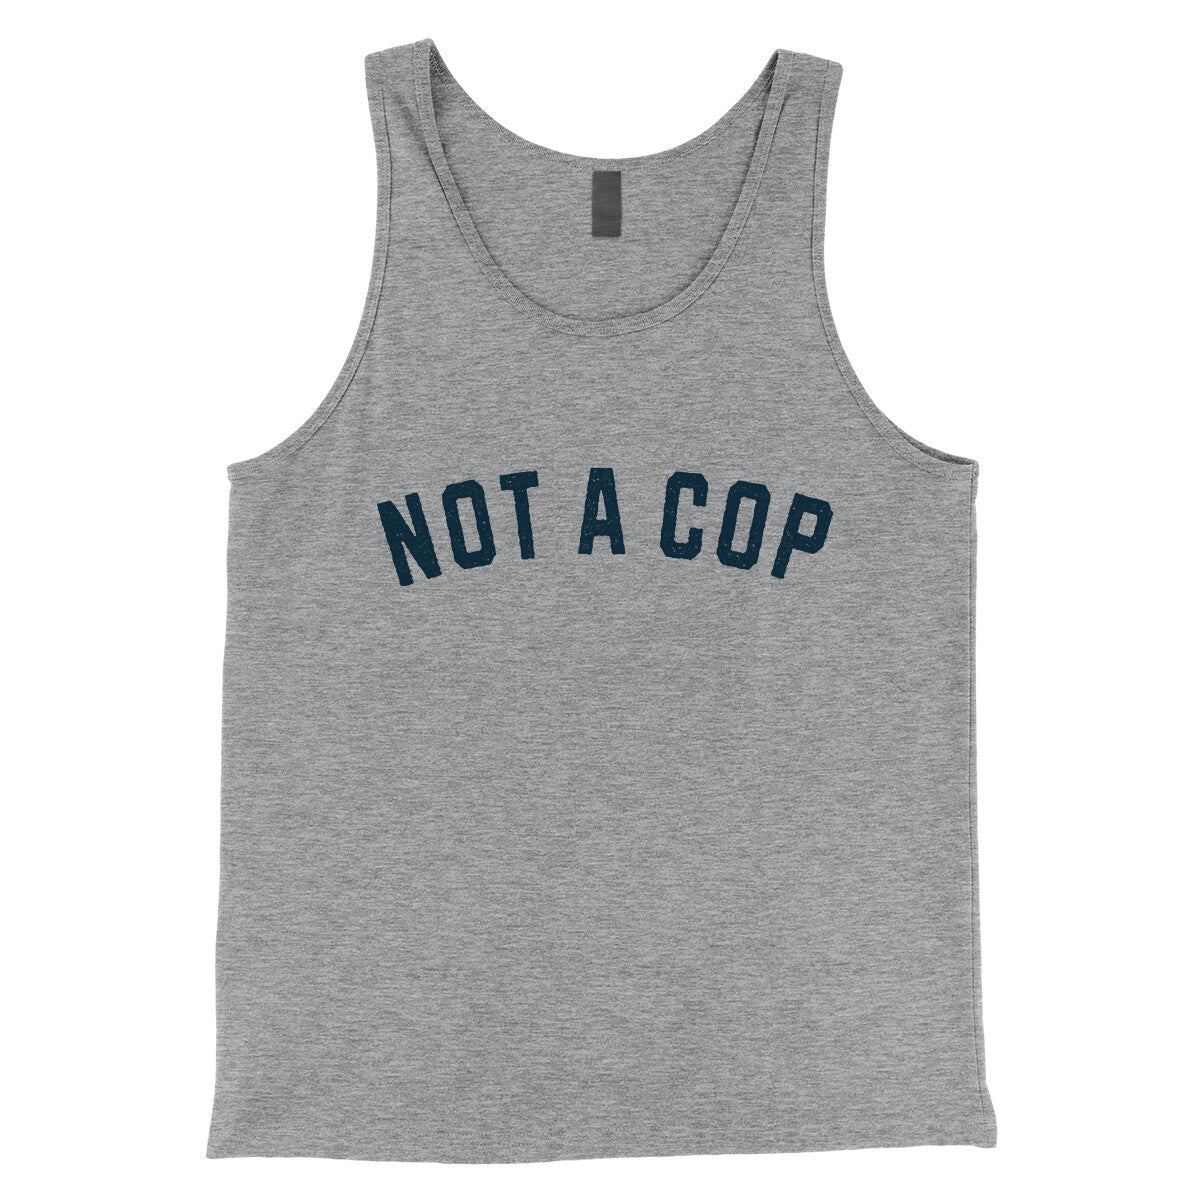 Not a Cop in Athletic Heather Color